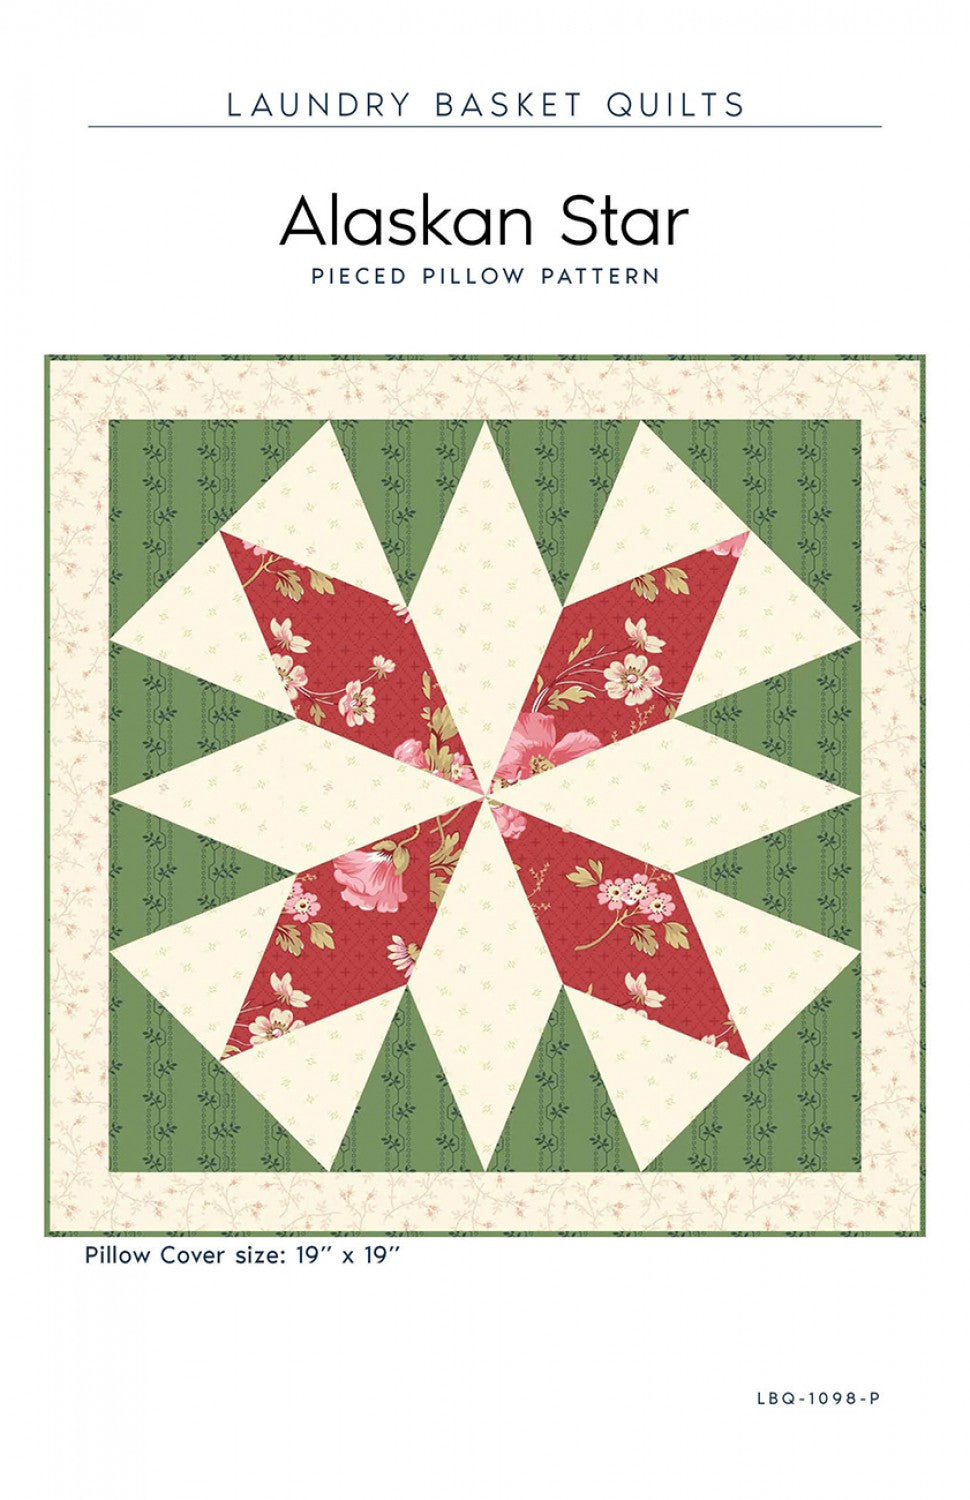 Alaskan Star Pillow Pattern by Edyta Sitar of Laundry Basket Quilts